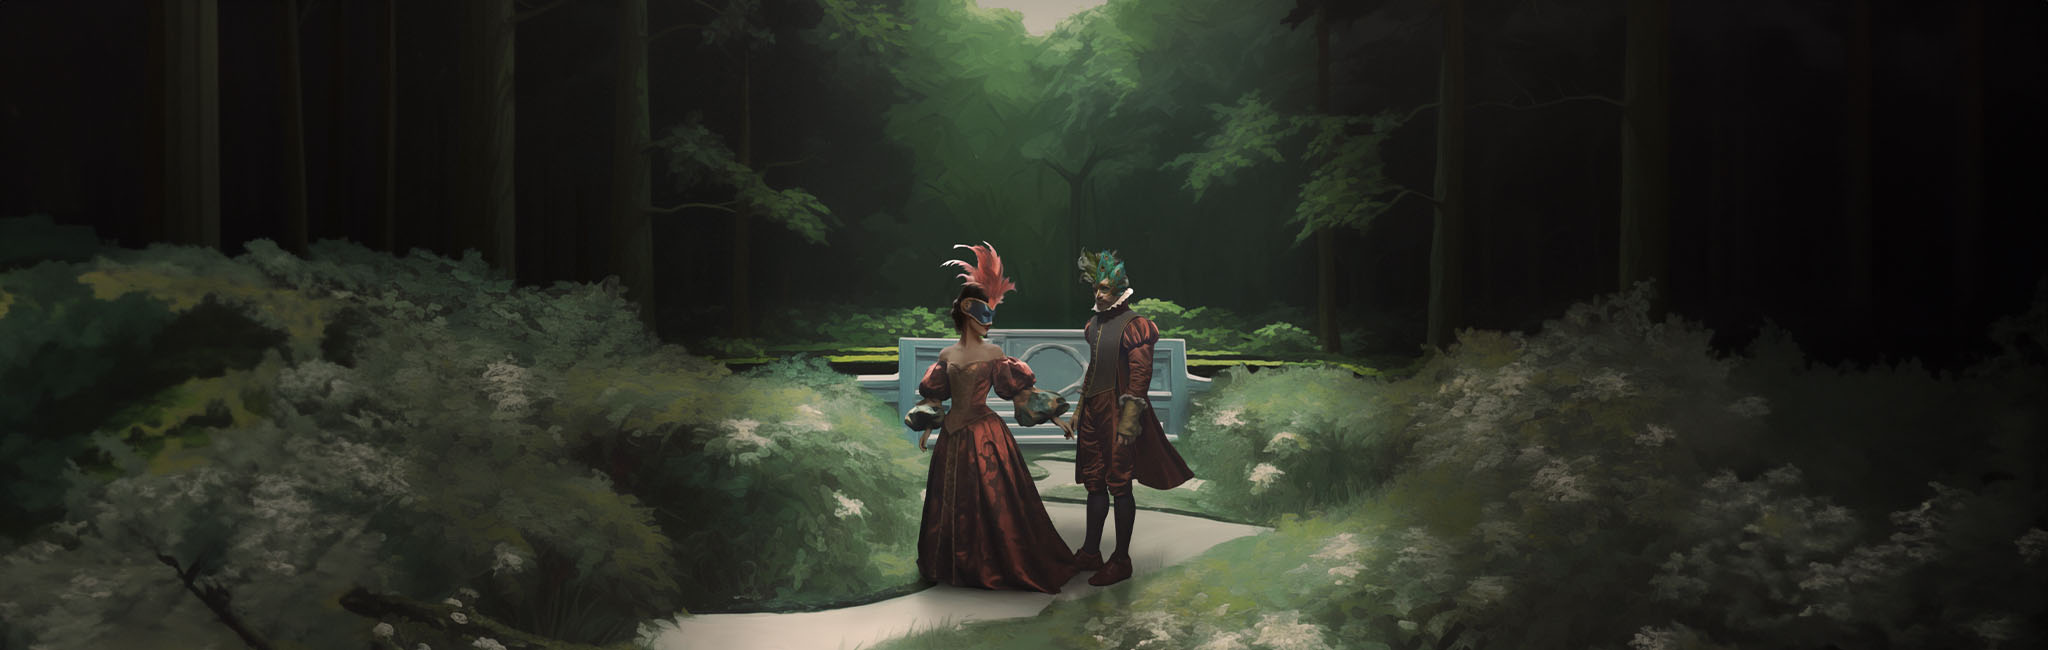 A garden with two people walking in formal 18th century attire. 